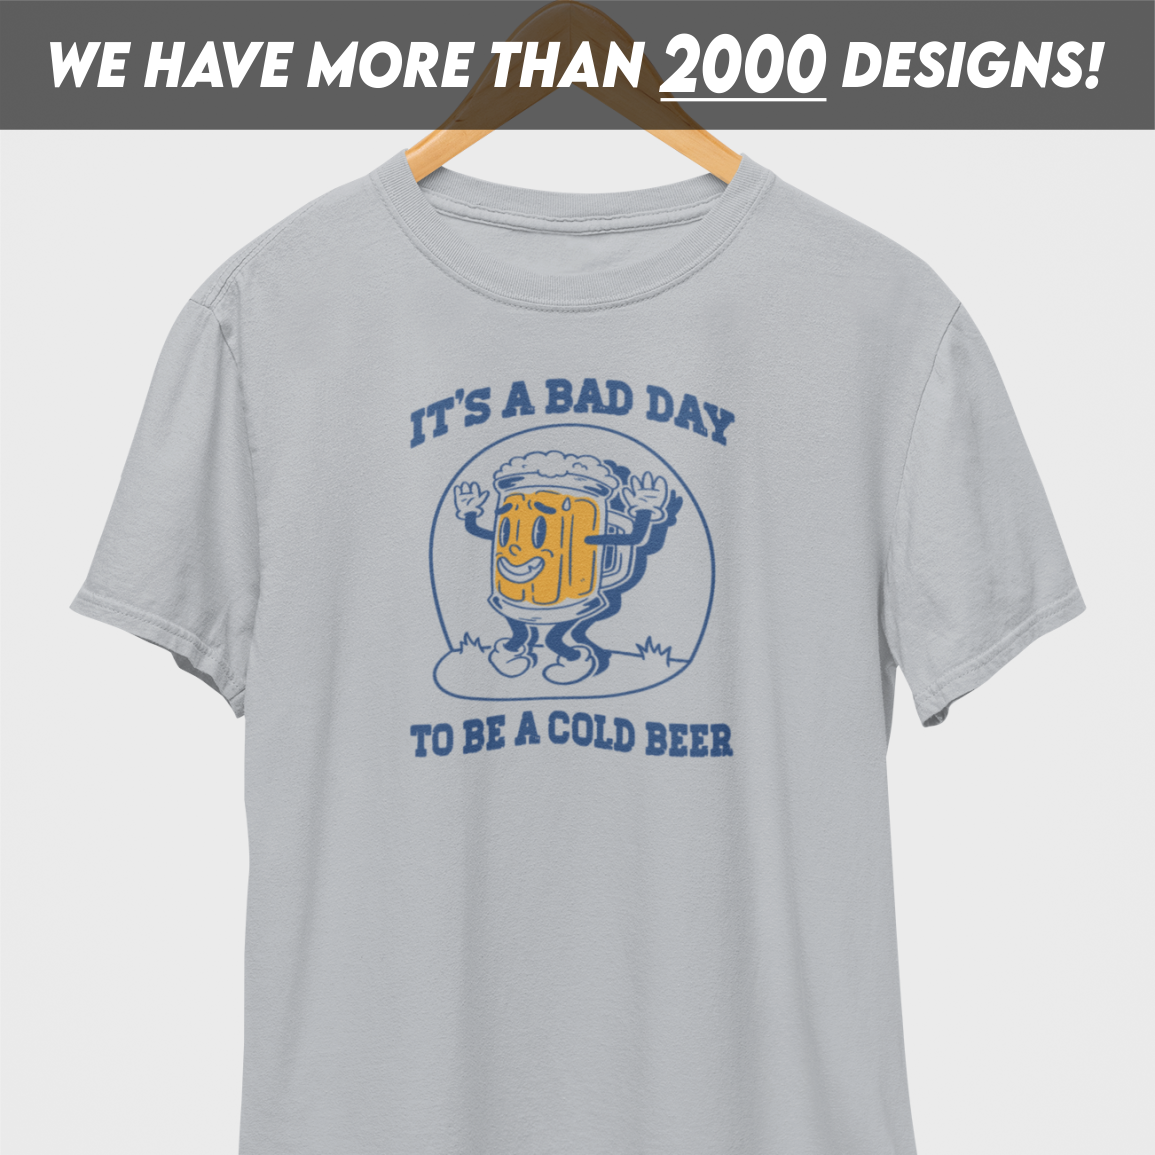 It's A Bad Day Beer T-Shirt